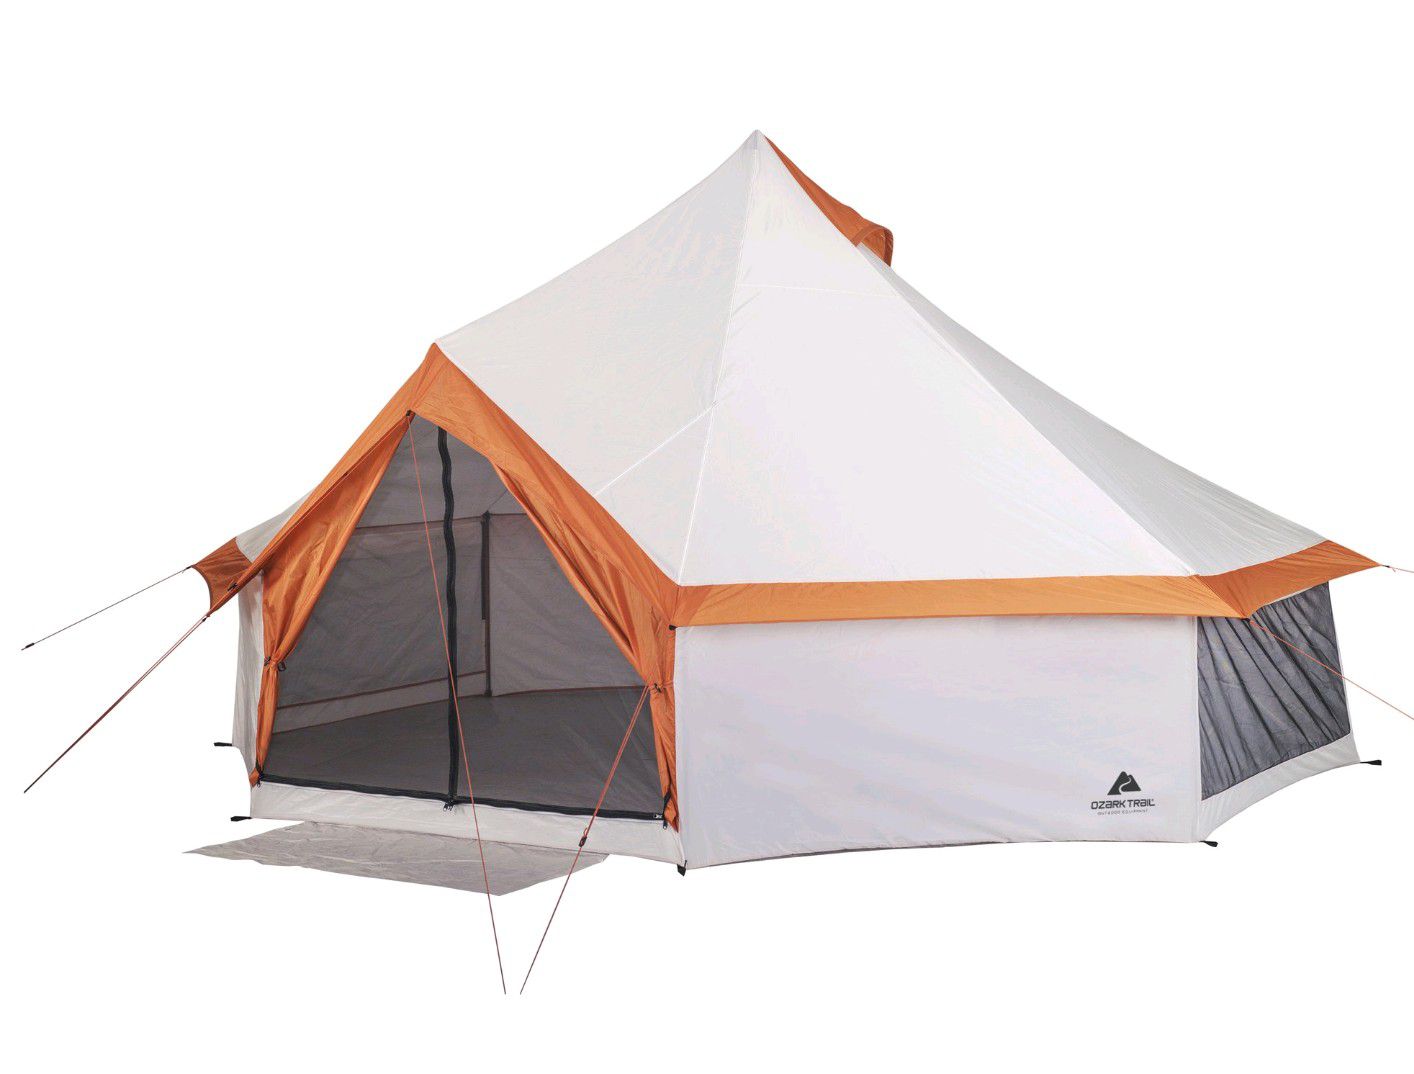 Large Tent For Camping, Outings, Music Festivals, Family Events and More. Sleeps 8. Can fit 2 air mattresses. (NEW)